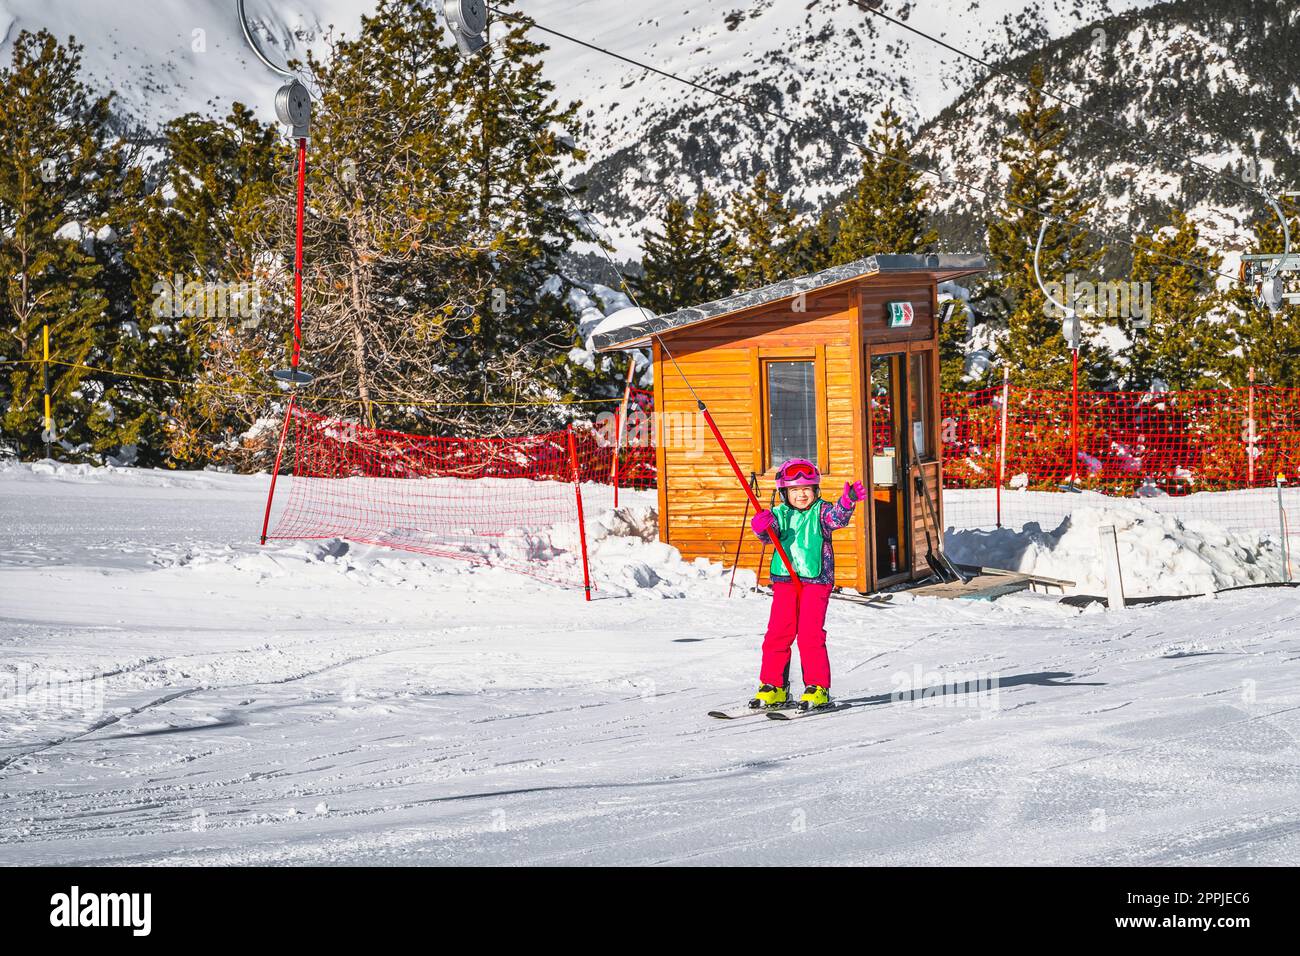 Young skier, a child, riding up on a ski drag lift and waving hand to a camera, Andorra Stock Photo